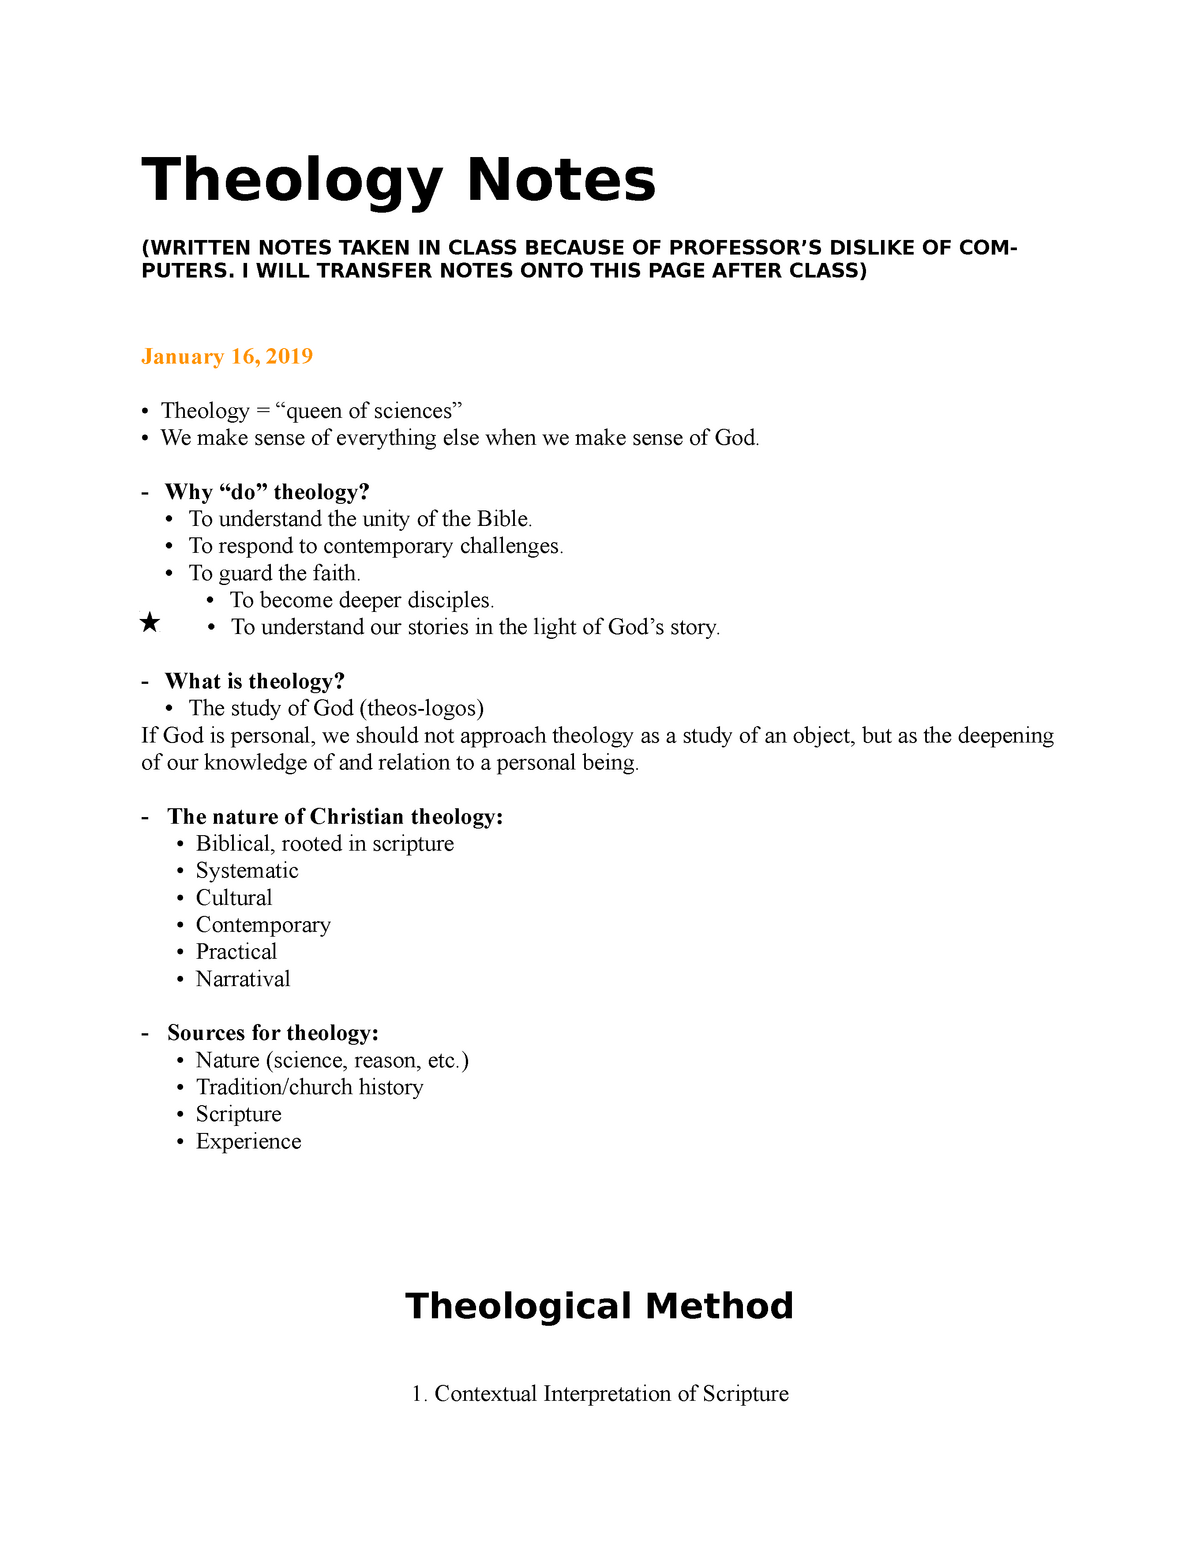 thesis about theology